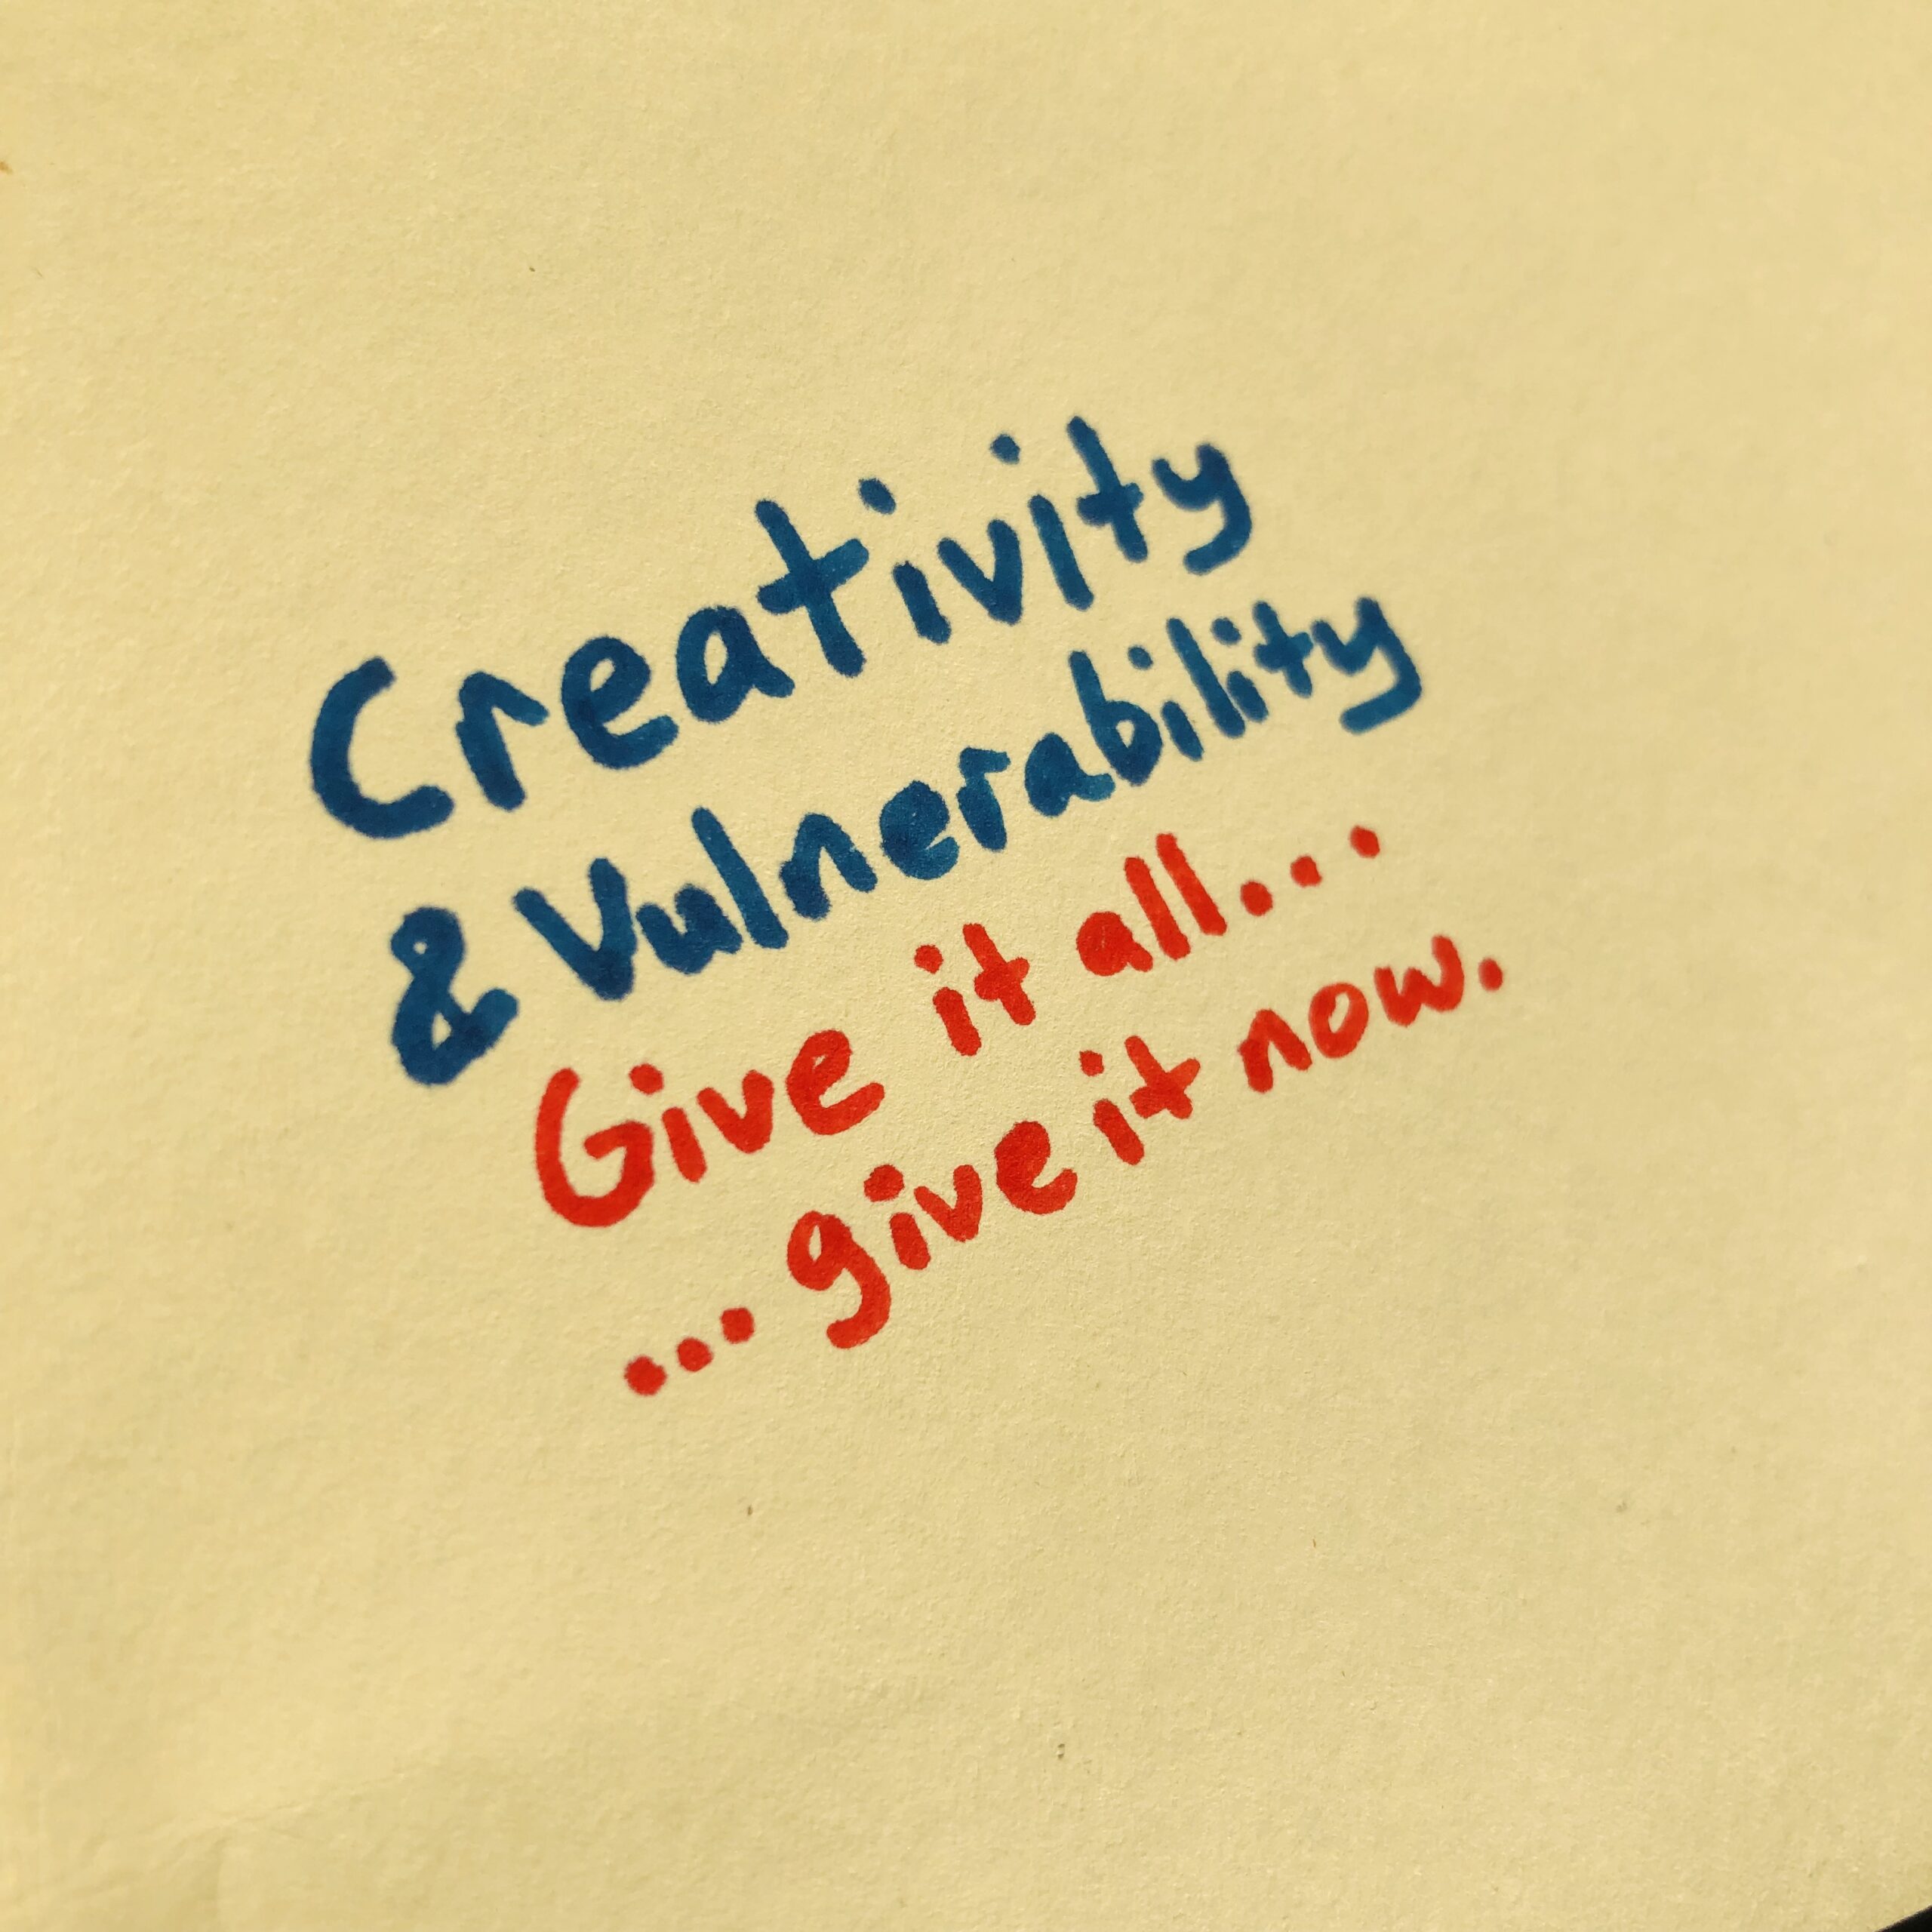 A piece of paper with handwriting on it: Creativity & Vulnerability: Give it all … give it now.